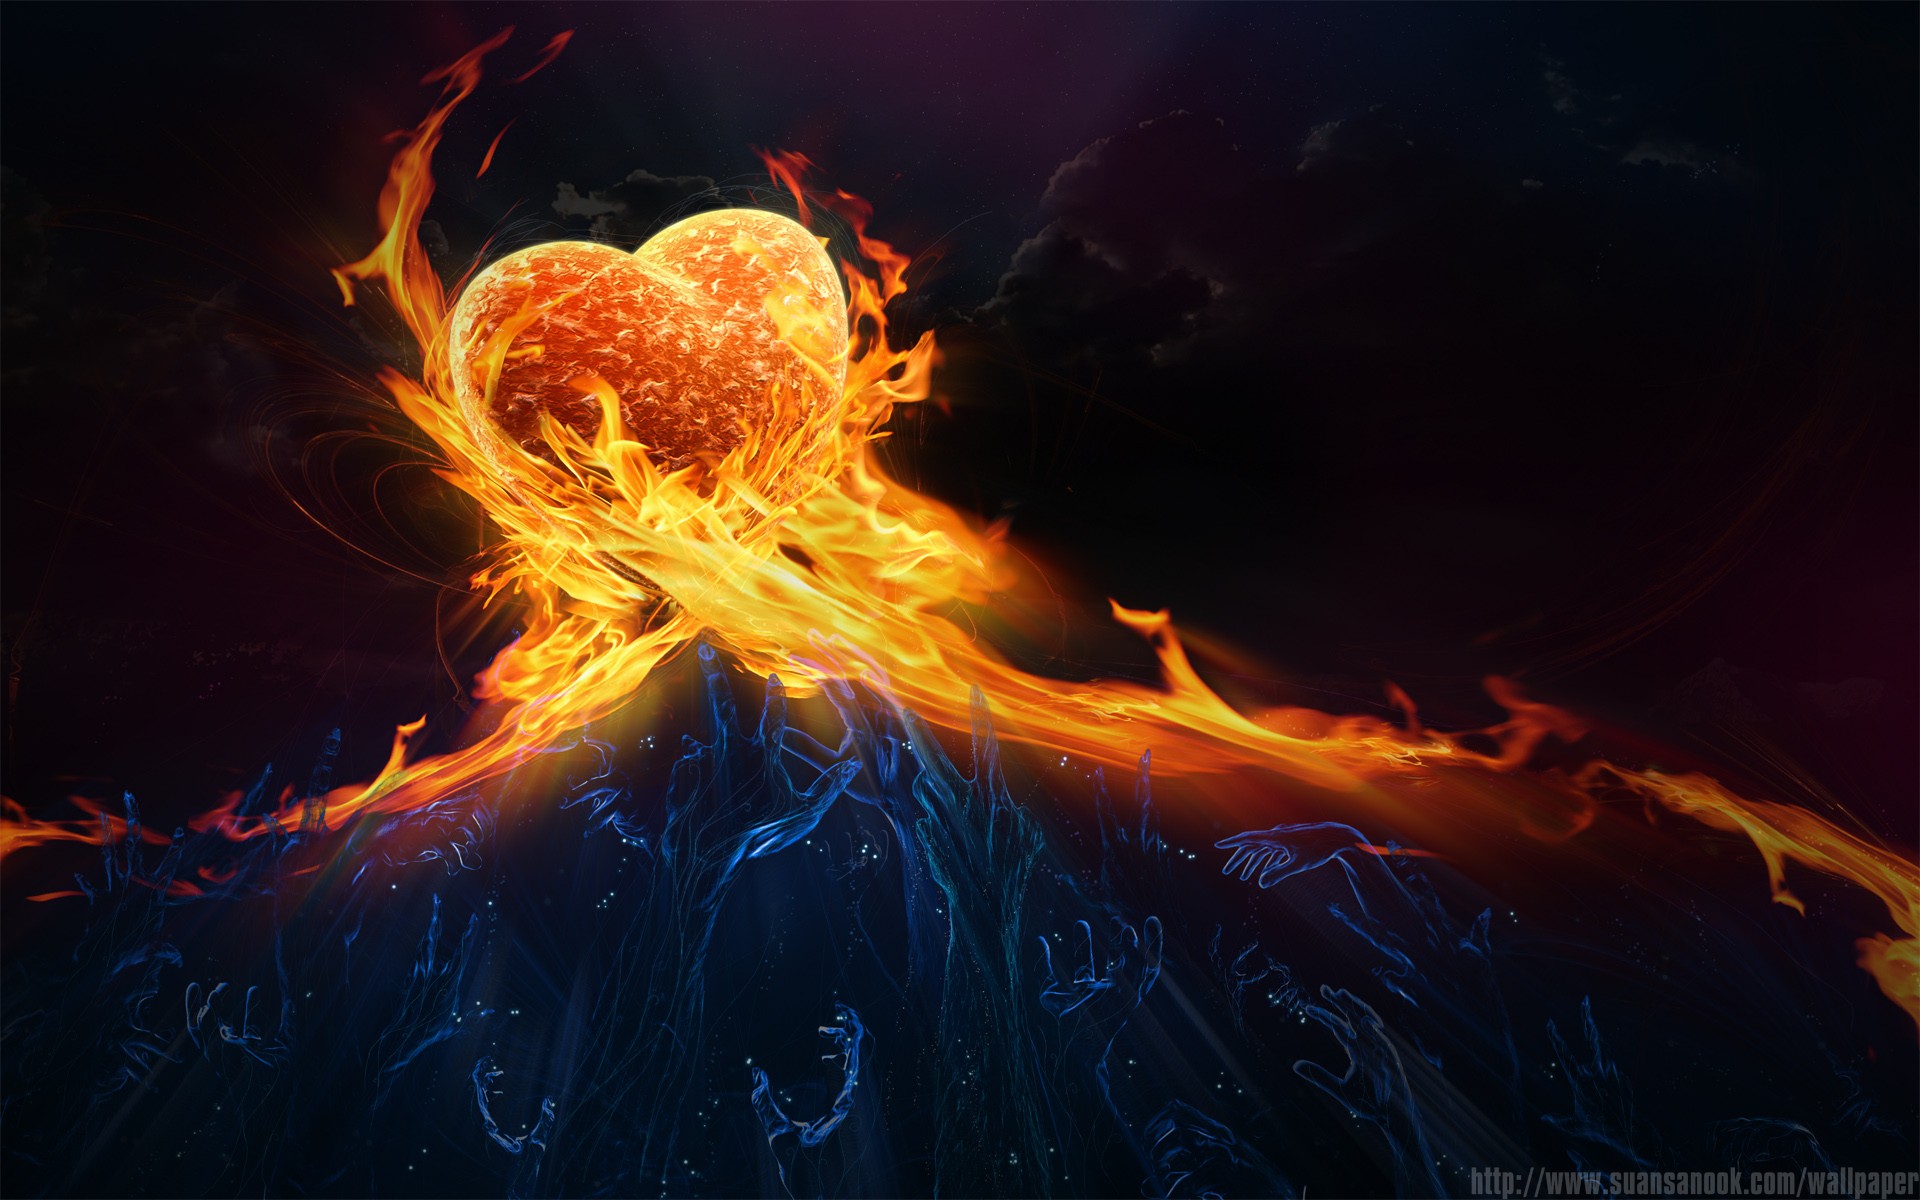 Fire Burning Heart of Passion